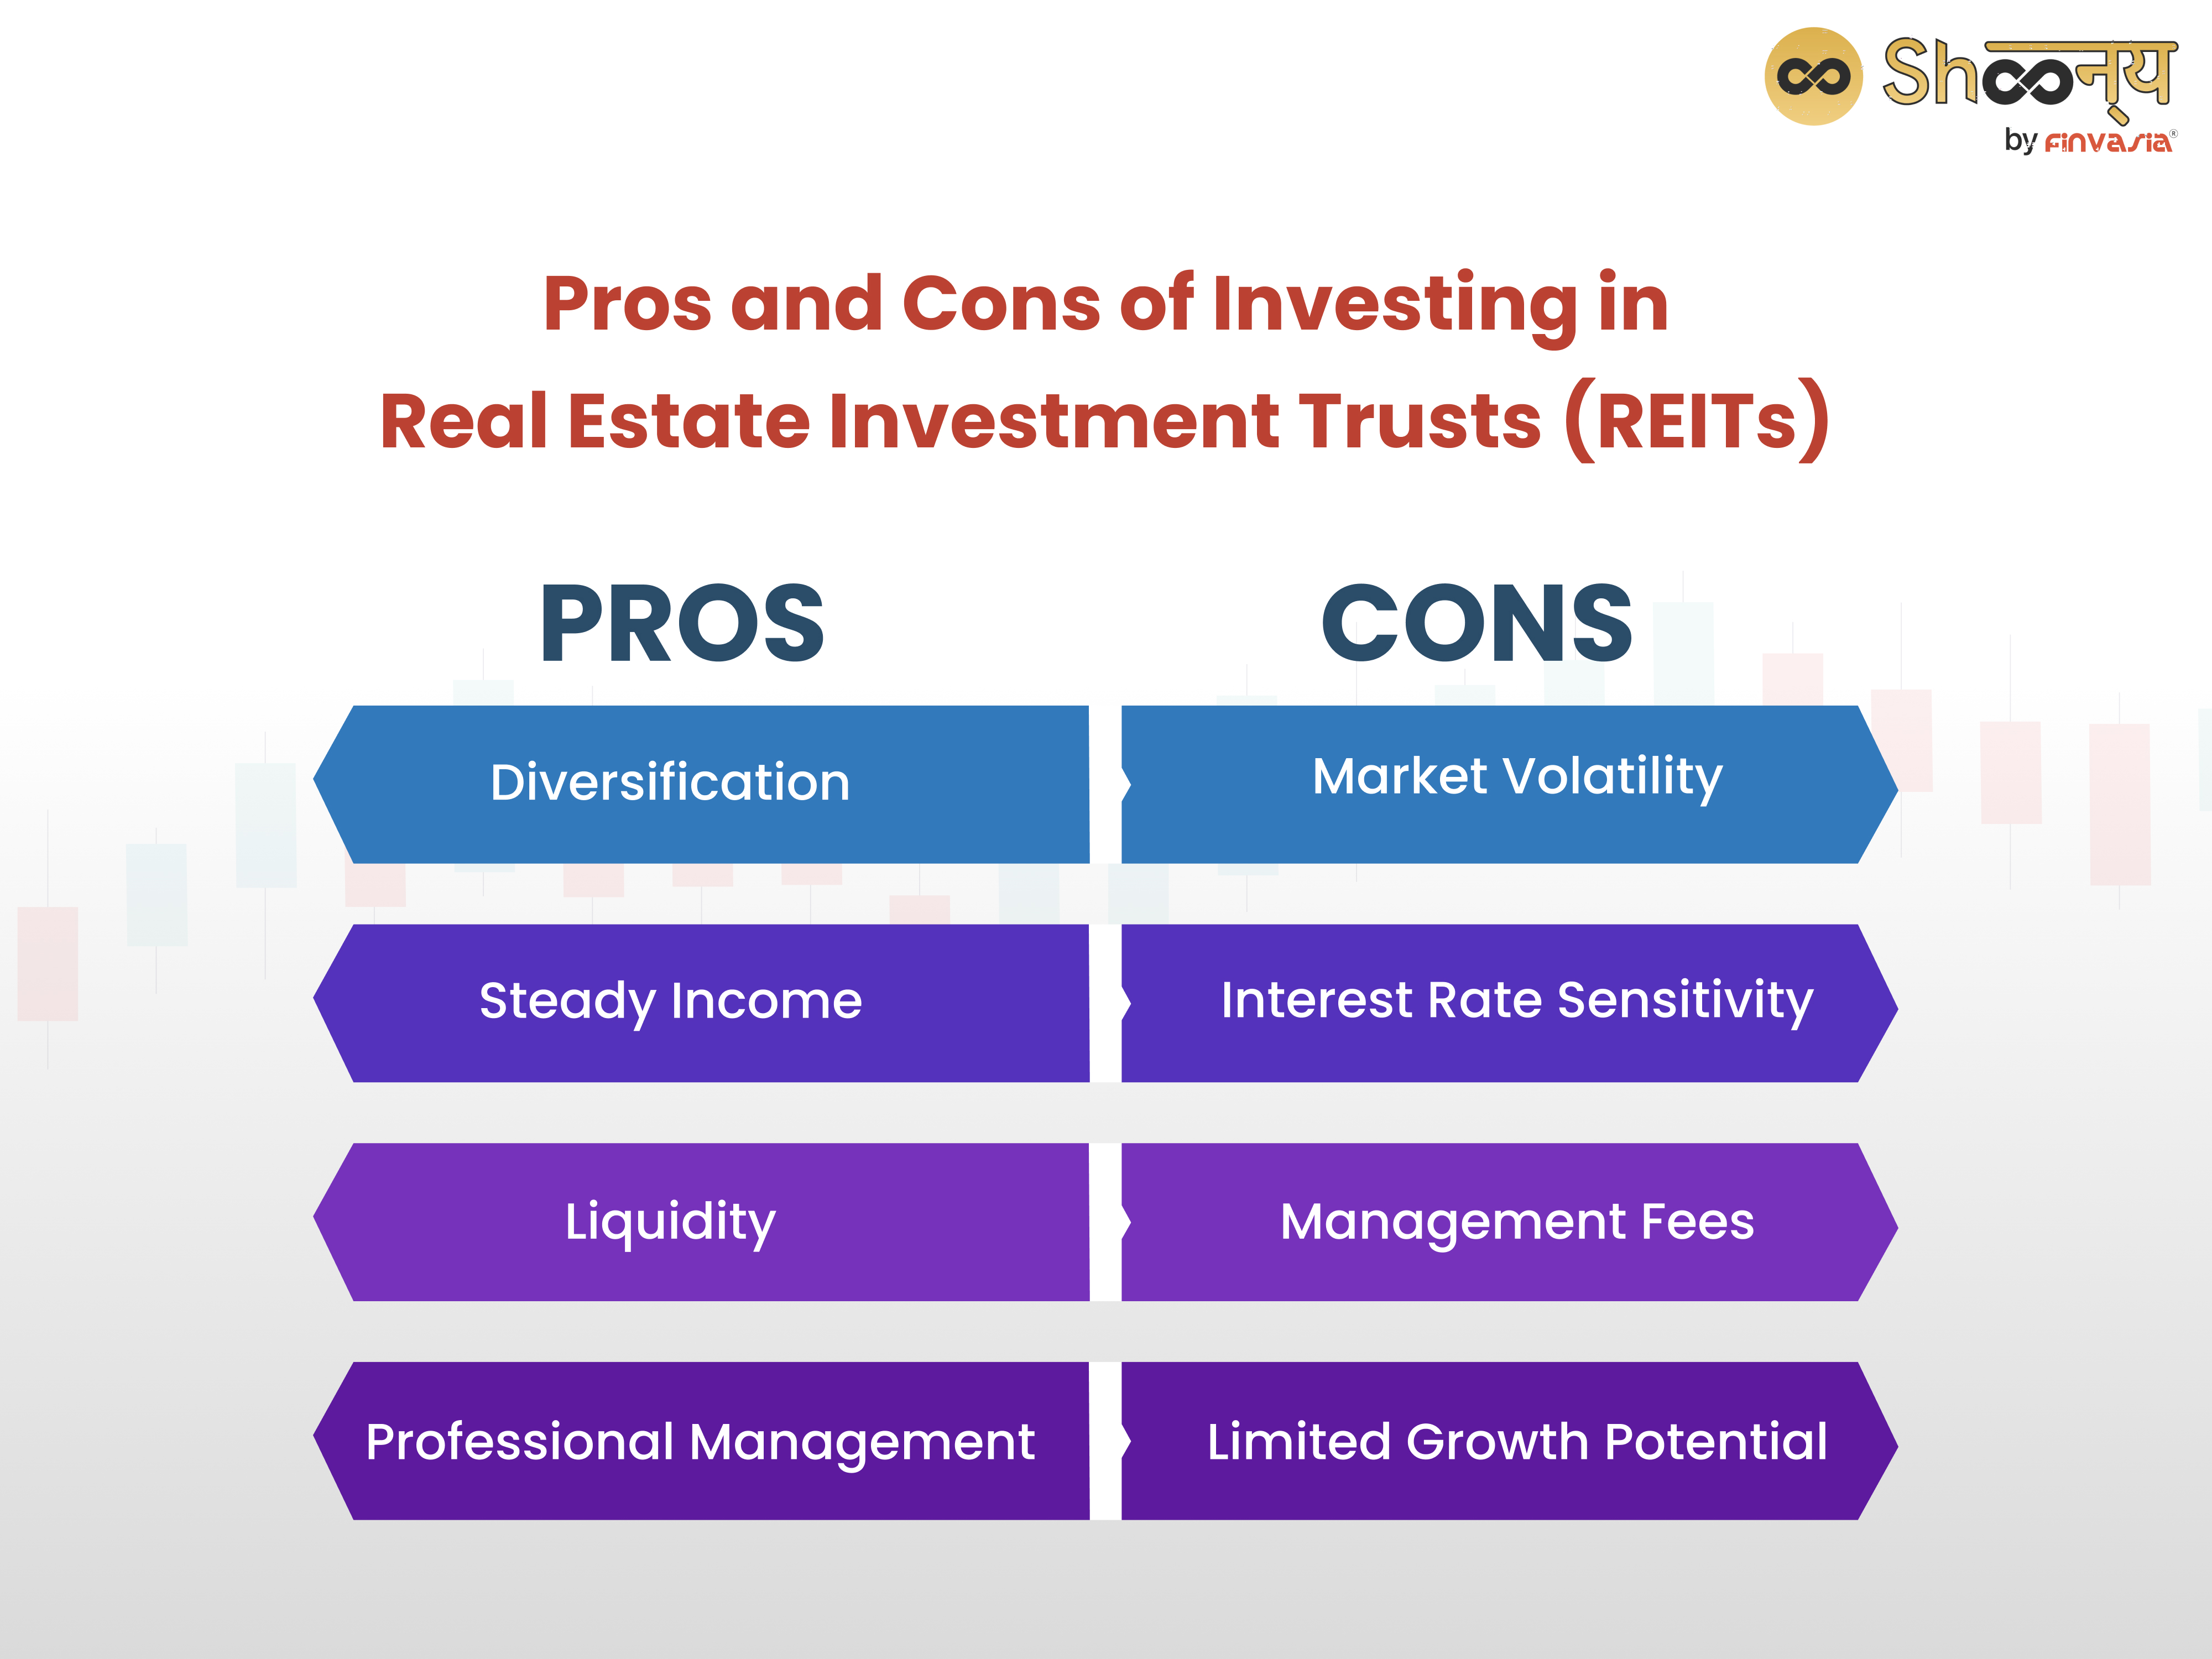 Pros and Cons of Investing in Real Estate Investment Trusts (REITs)